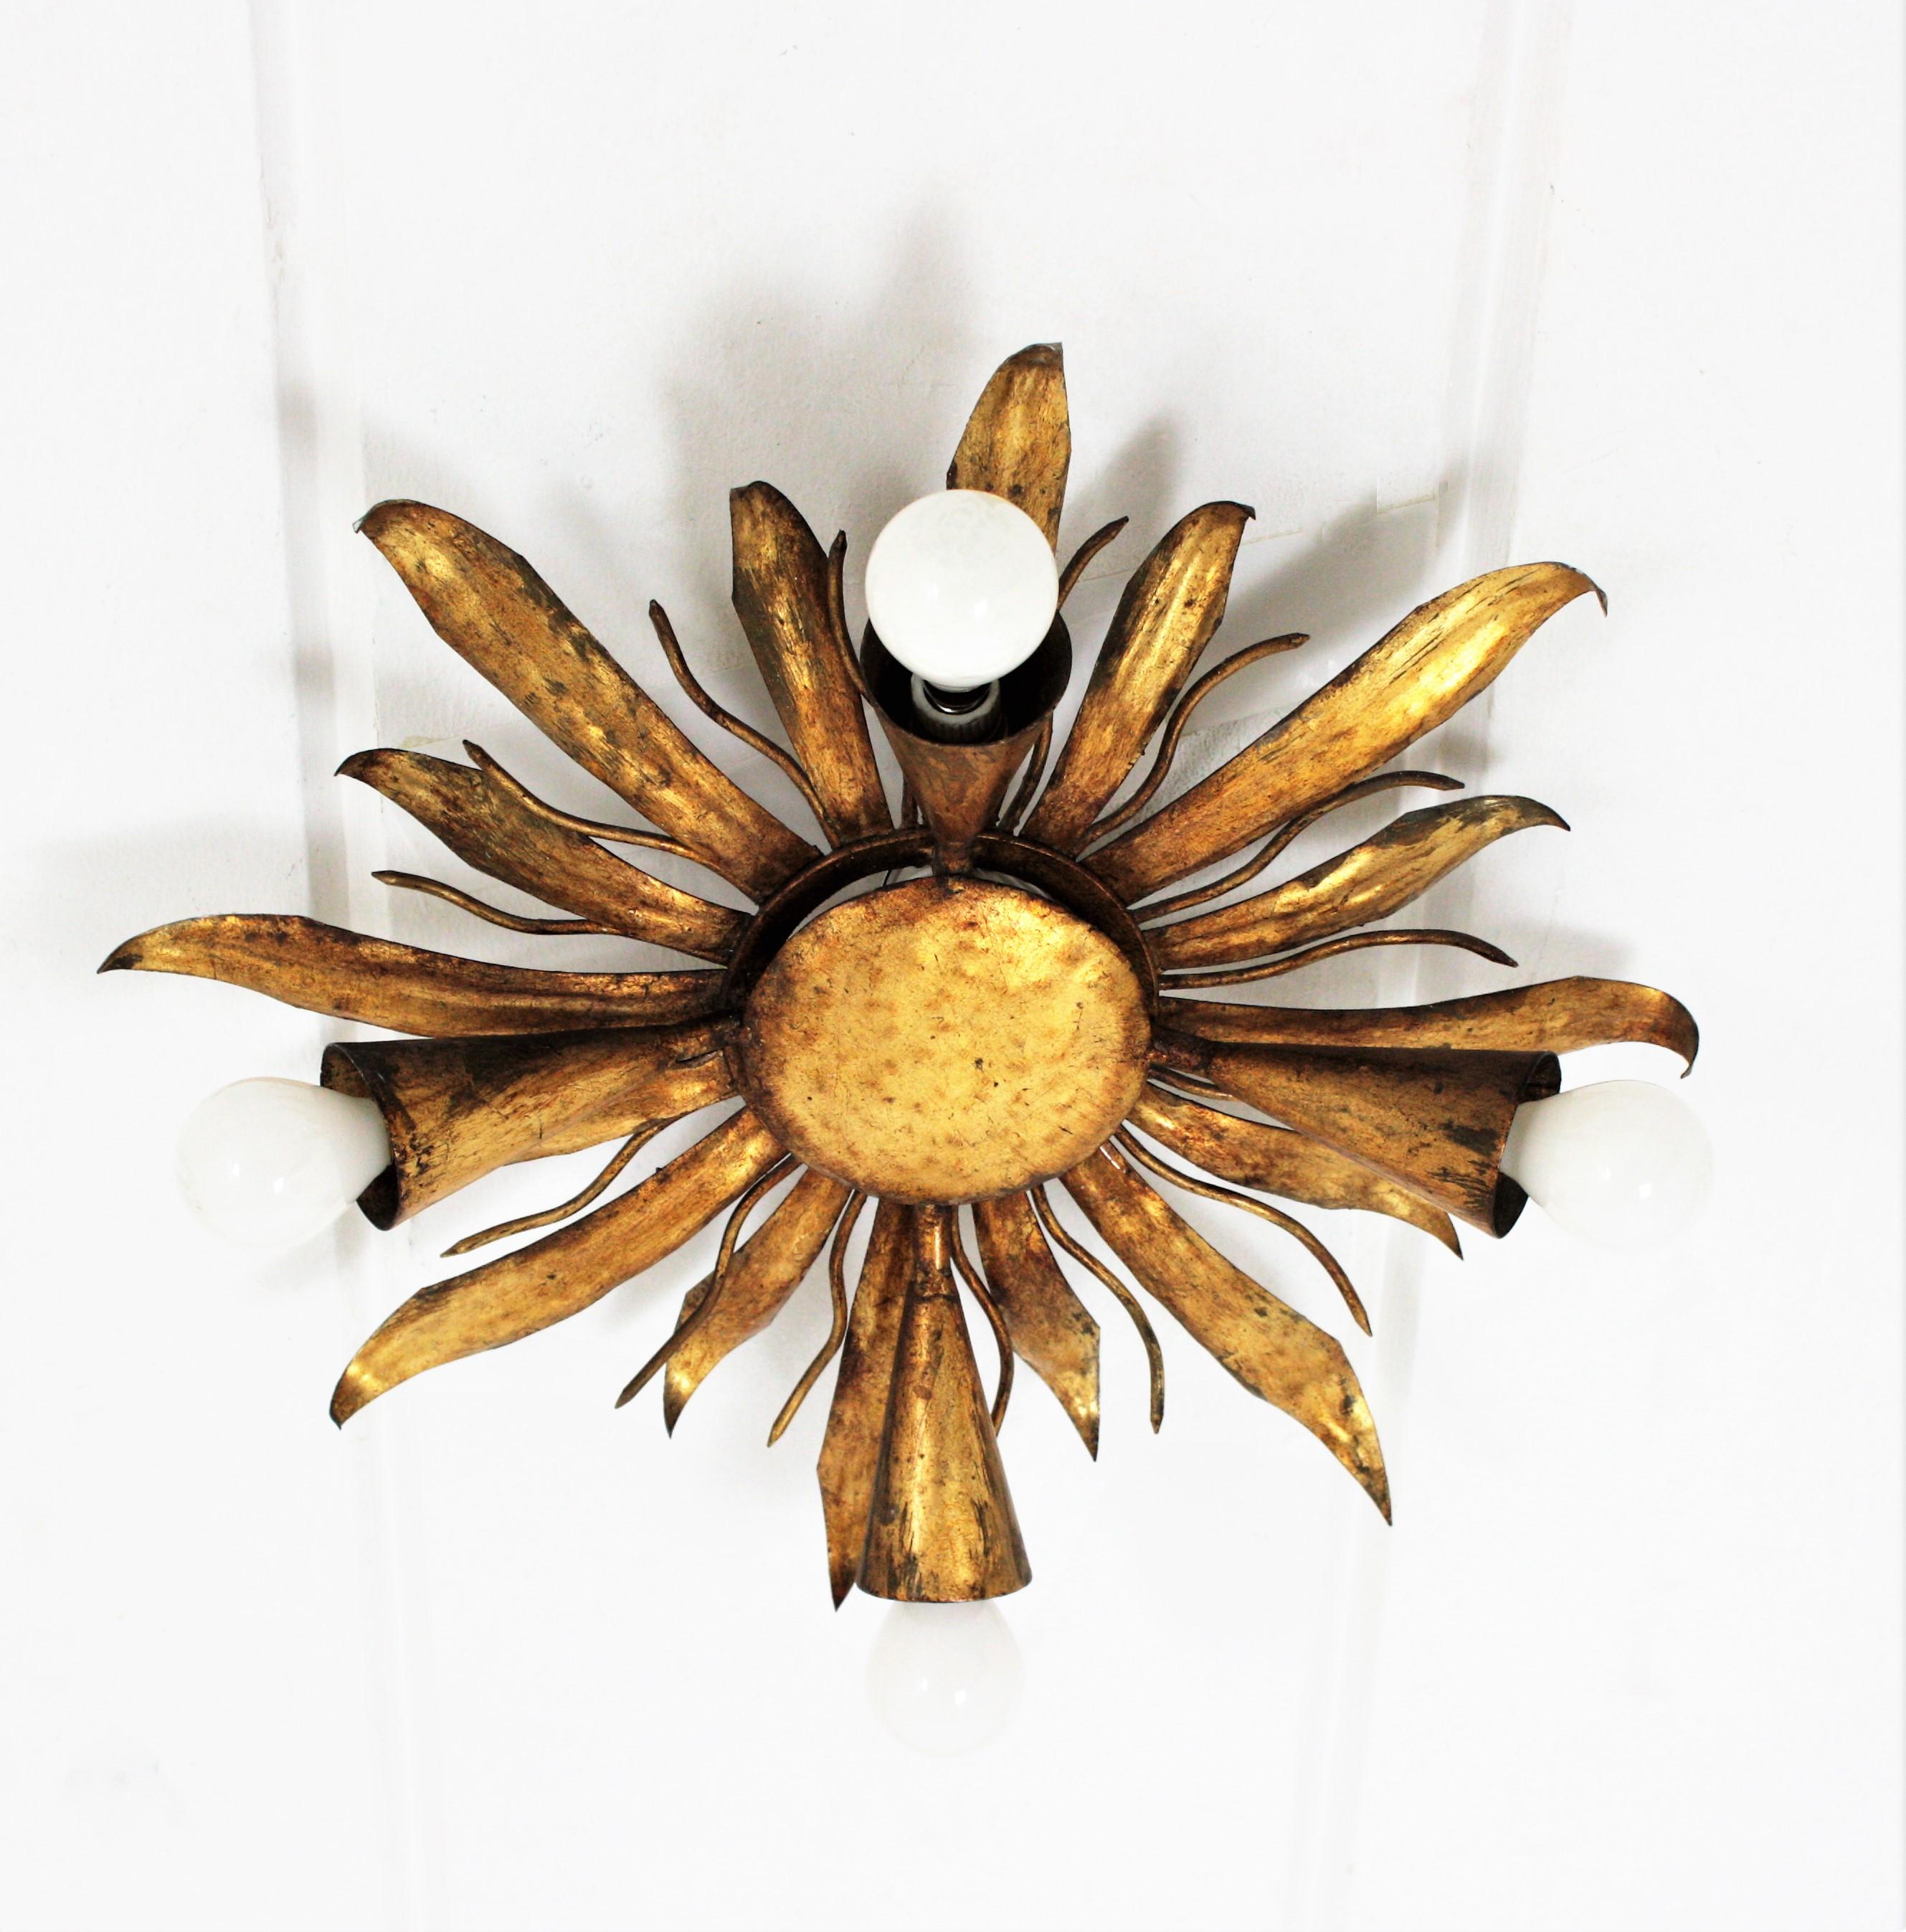 French Gold Gilt Iron Sunburst Flush Mount or Light Fixture, 1940s
French modern neoclassical gilt iron leafed sunburst flush mount or light fixture from the late Art Deco period, France, 1940s.
This sunburst or flower burst light fixture is highly